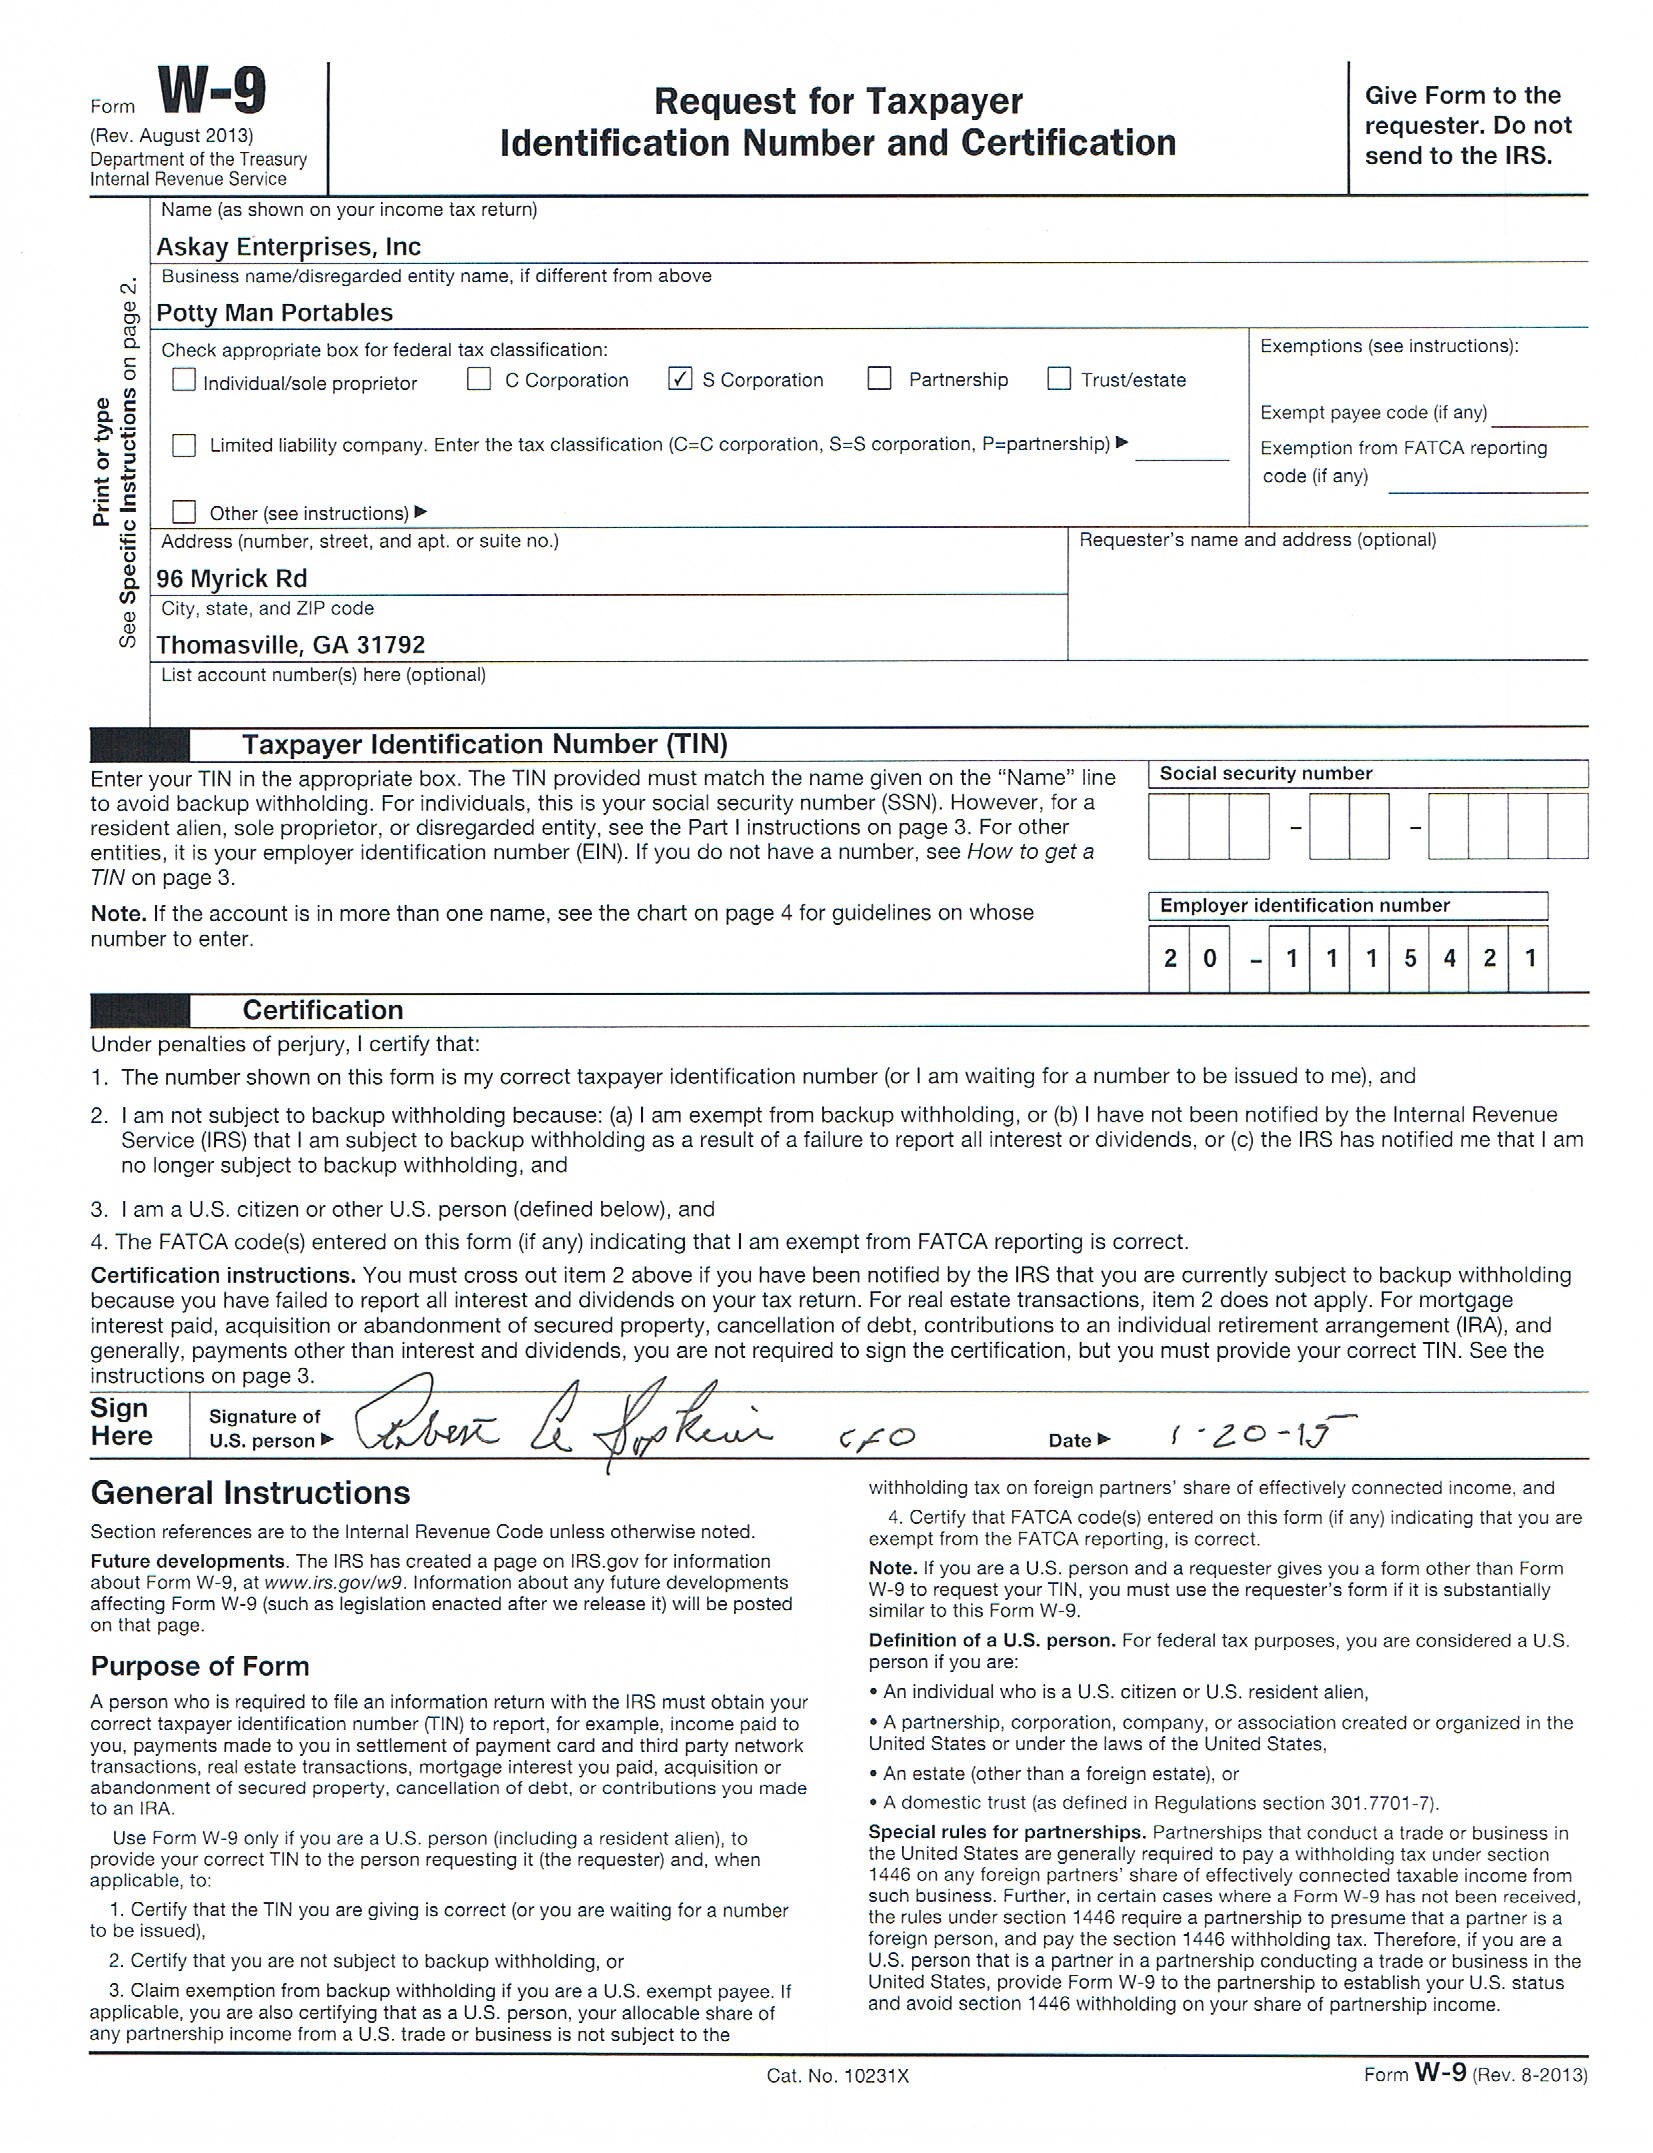 W 9 Tax Form Irs Blank For 2016 Design Templates 2014 Choice-Free Printable W-9 Forms Blank